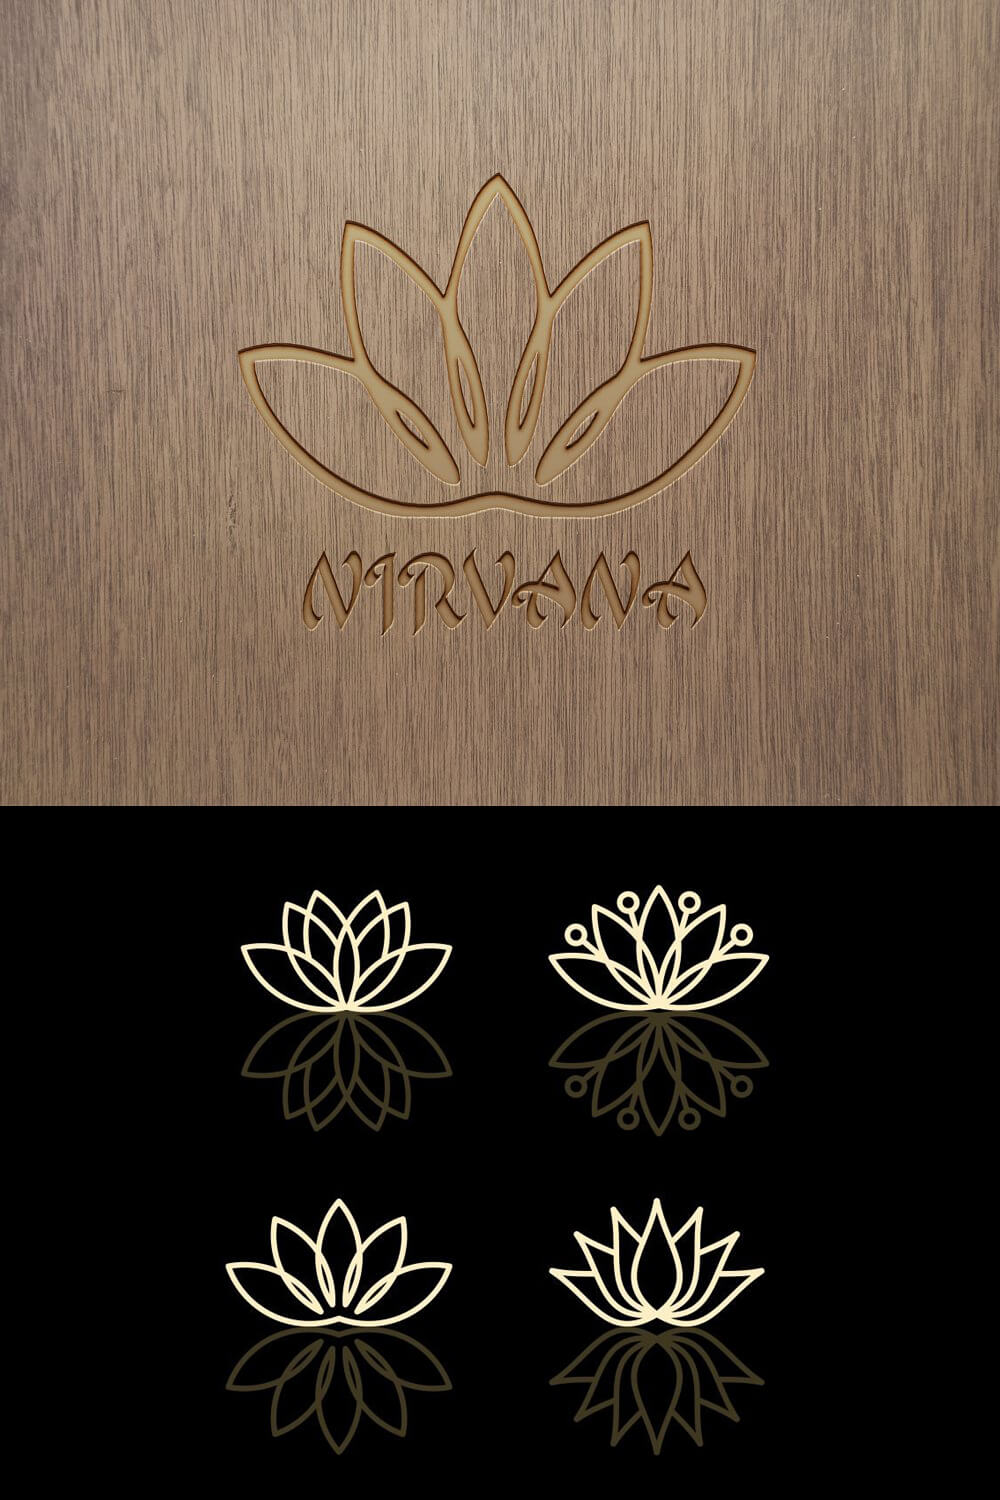 Two versions of the lotus logo on wooden and glossy backgrounds.